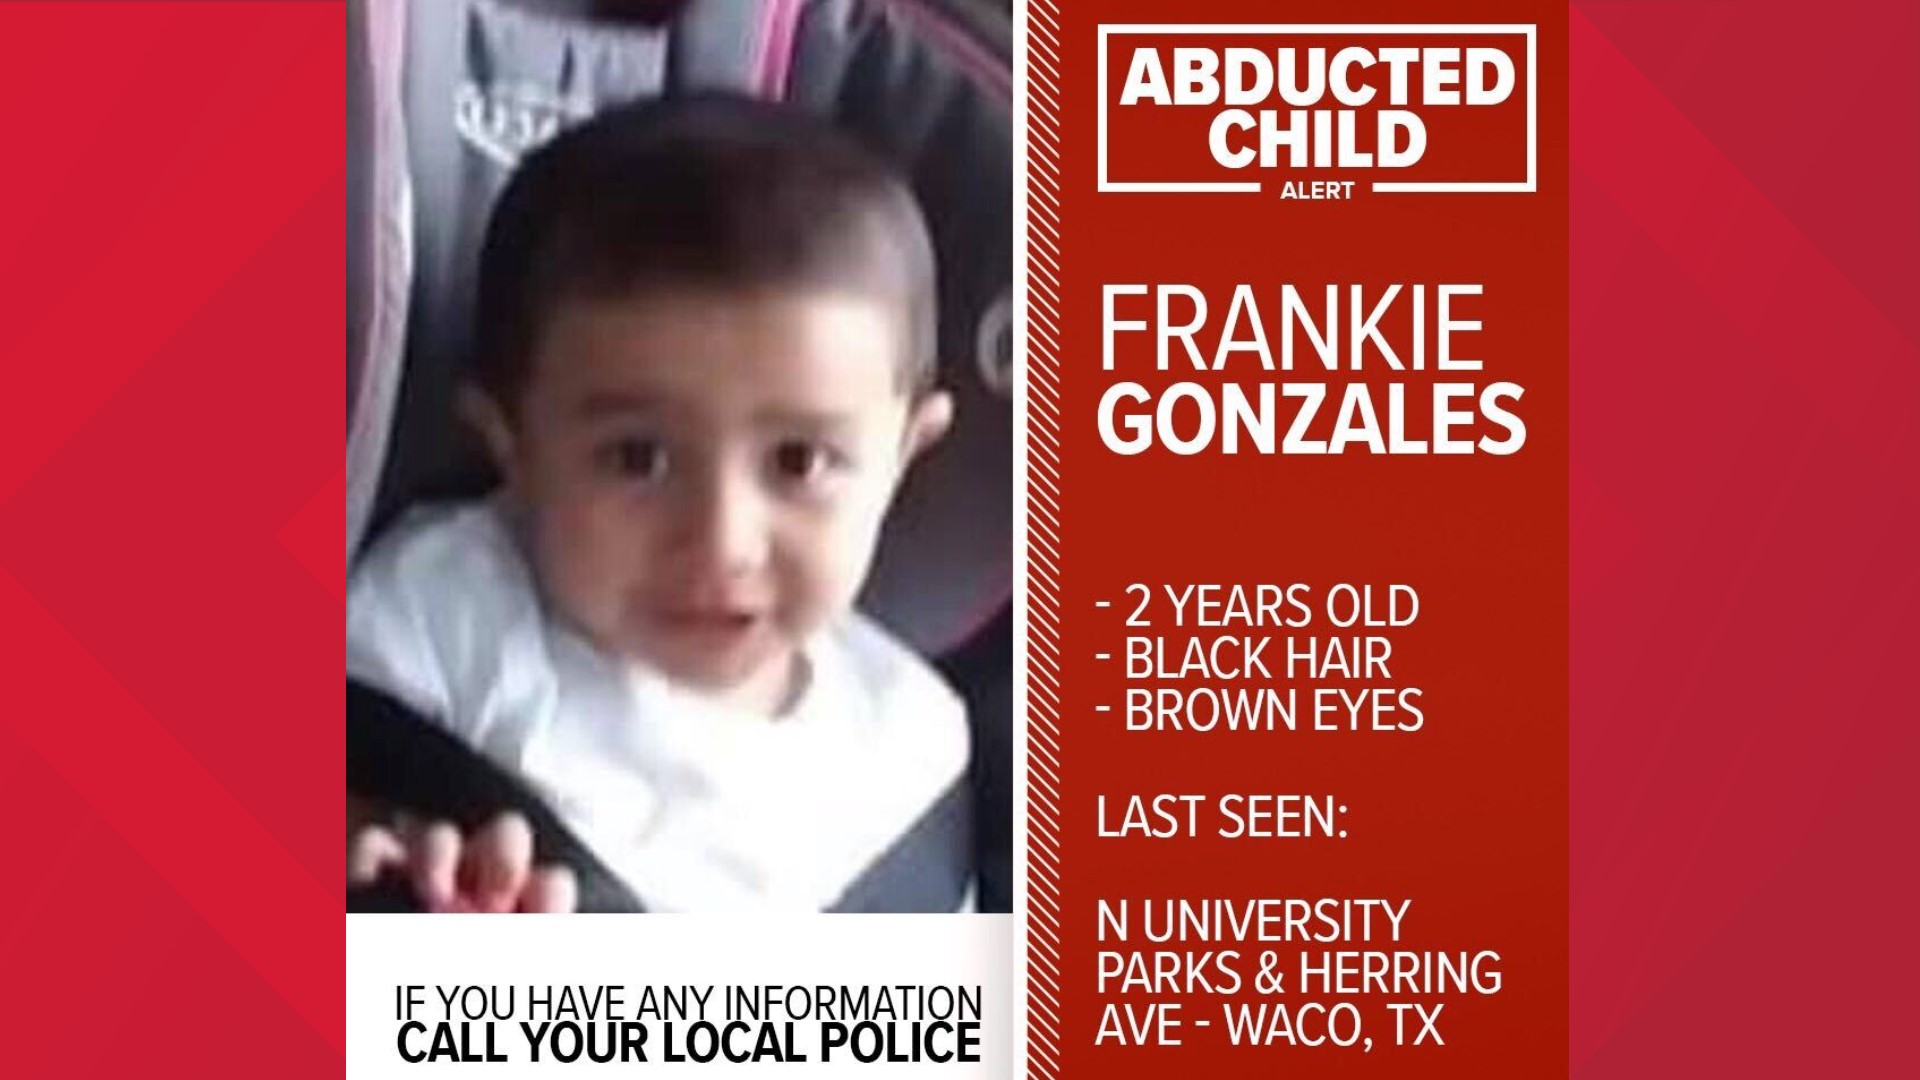 An abduction alert was issued for Frankie Gonzalez by the Texas Amber Alert Network. Law enforcement officials believe him to be in grave danger.